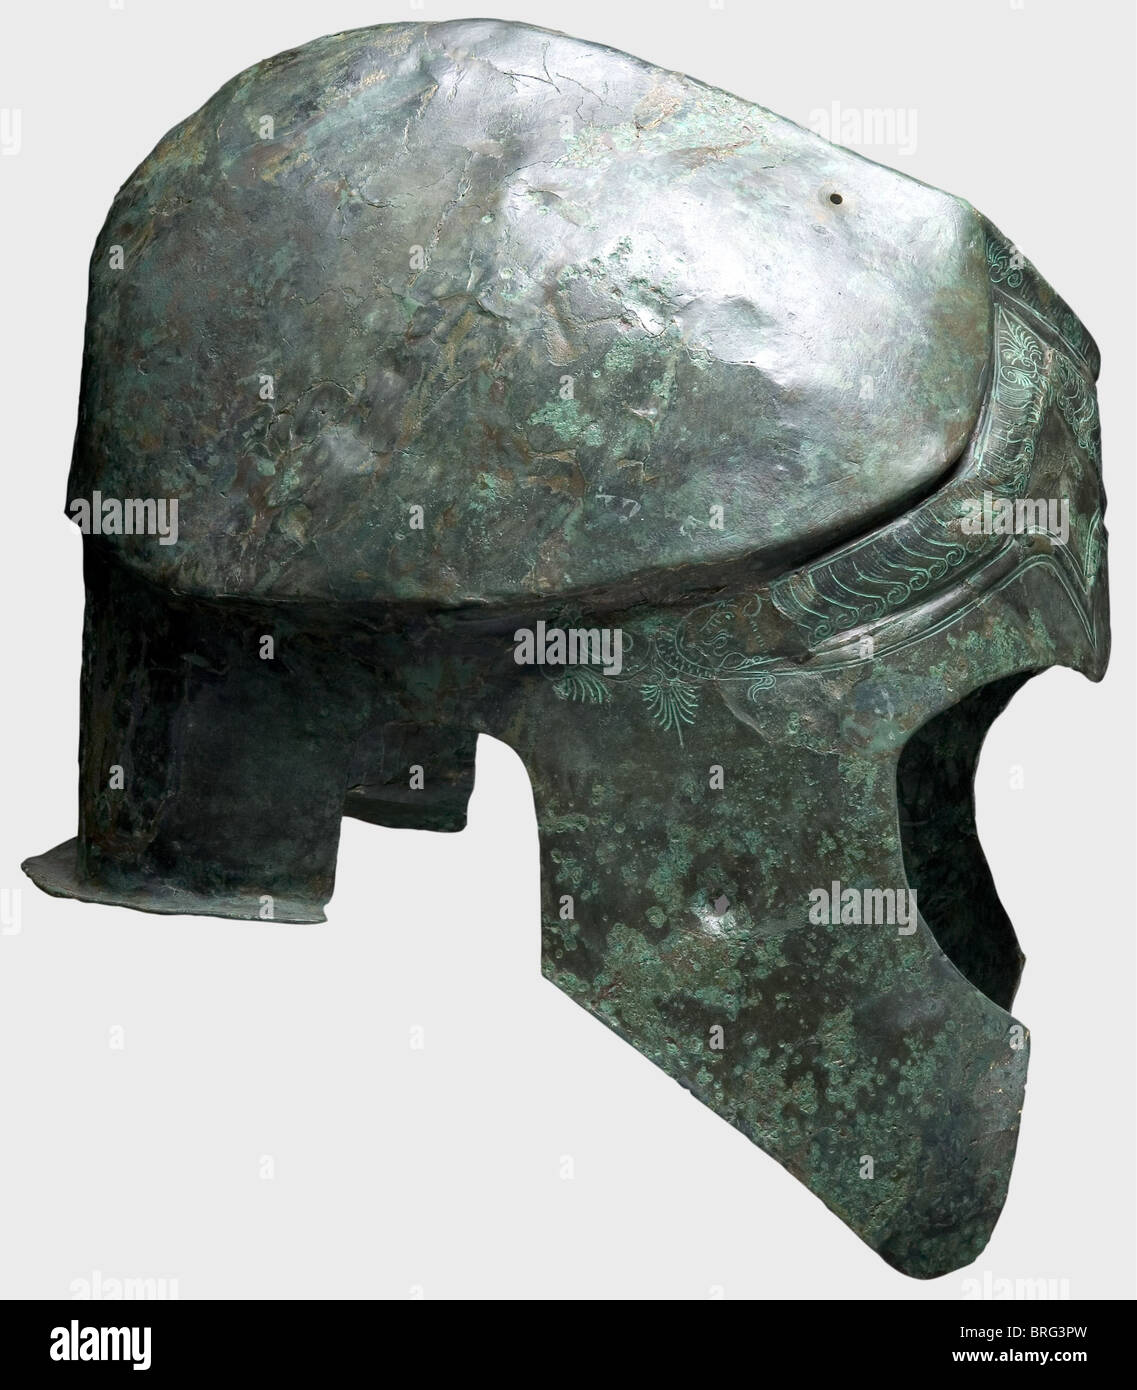 A Chalcidian helmet,5th/4th century B.C.Bronze.Narrow elongated skull with a carinated and crested crown,holes for the plume attachment,large cheek pieces and ear cutouts,and a short flaring neck guard.The forehead has decorative eyebrows in relief and richly chiselled decorative palmettos,serpents' heads,locks of hair,and floral ornamentation.The right cheek piece has a nail hole,presumably from the votive offering of the helmet in a sanctuary.Height 23 cm.Weight 828 g.The metal is distorted,but well-preserved with dark-green patina.The interi,Additional-Rights-Clearences-Not Available Stock Photo